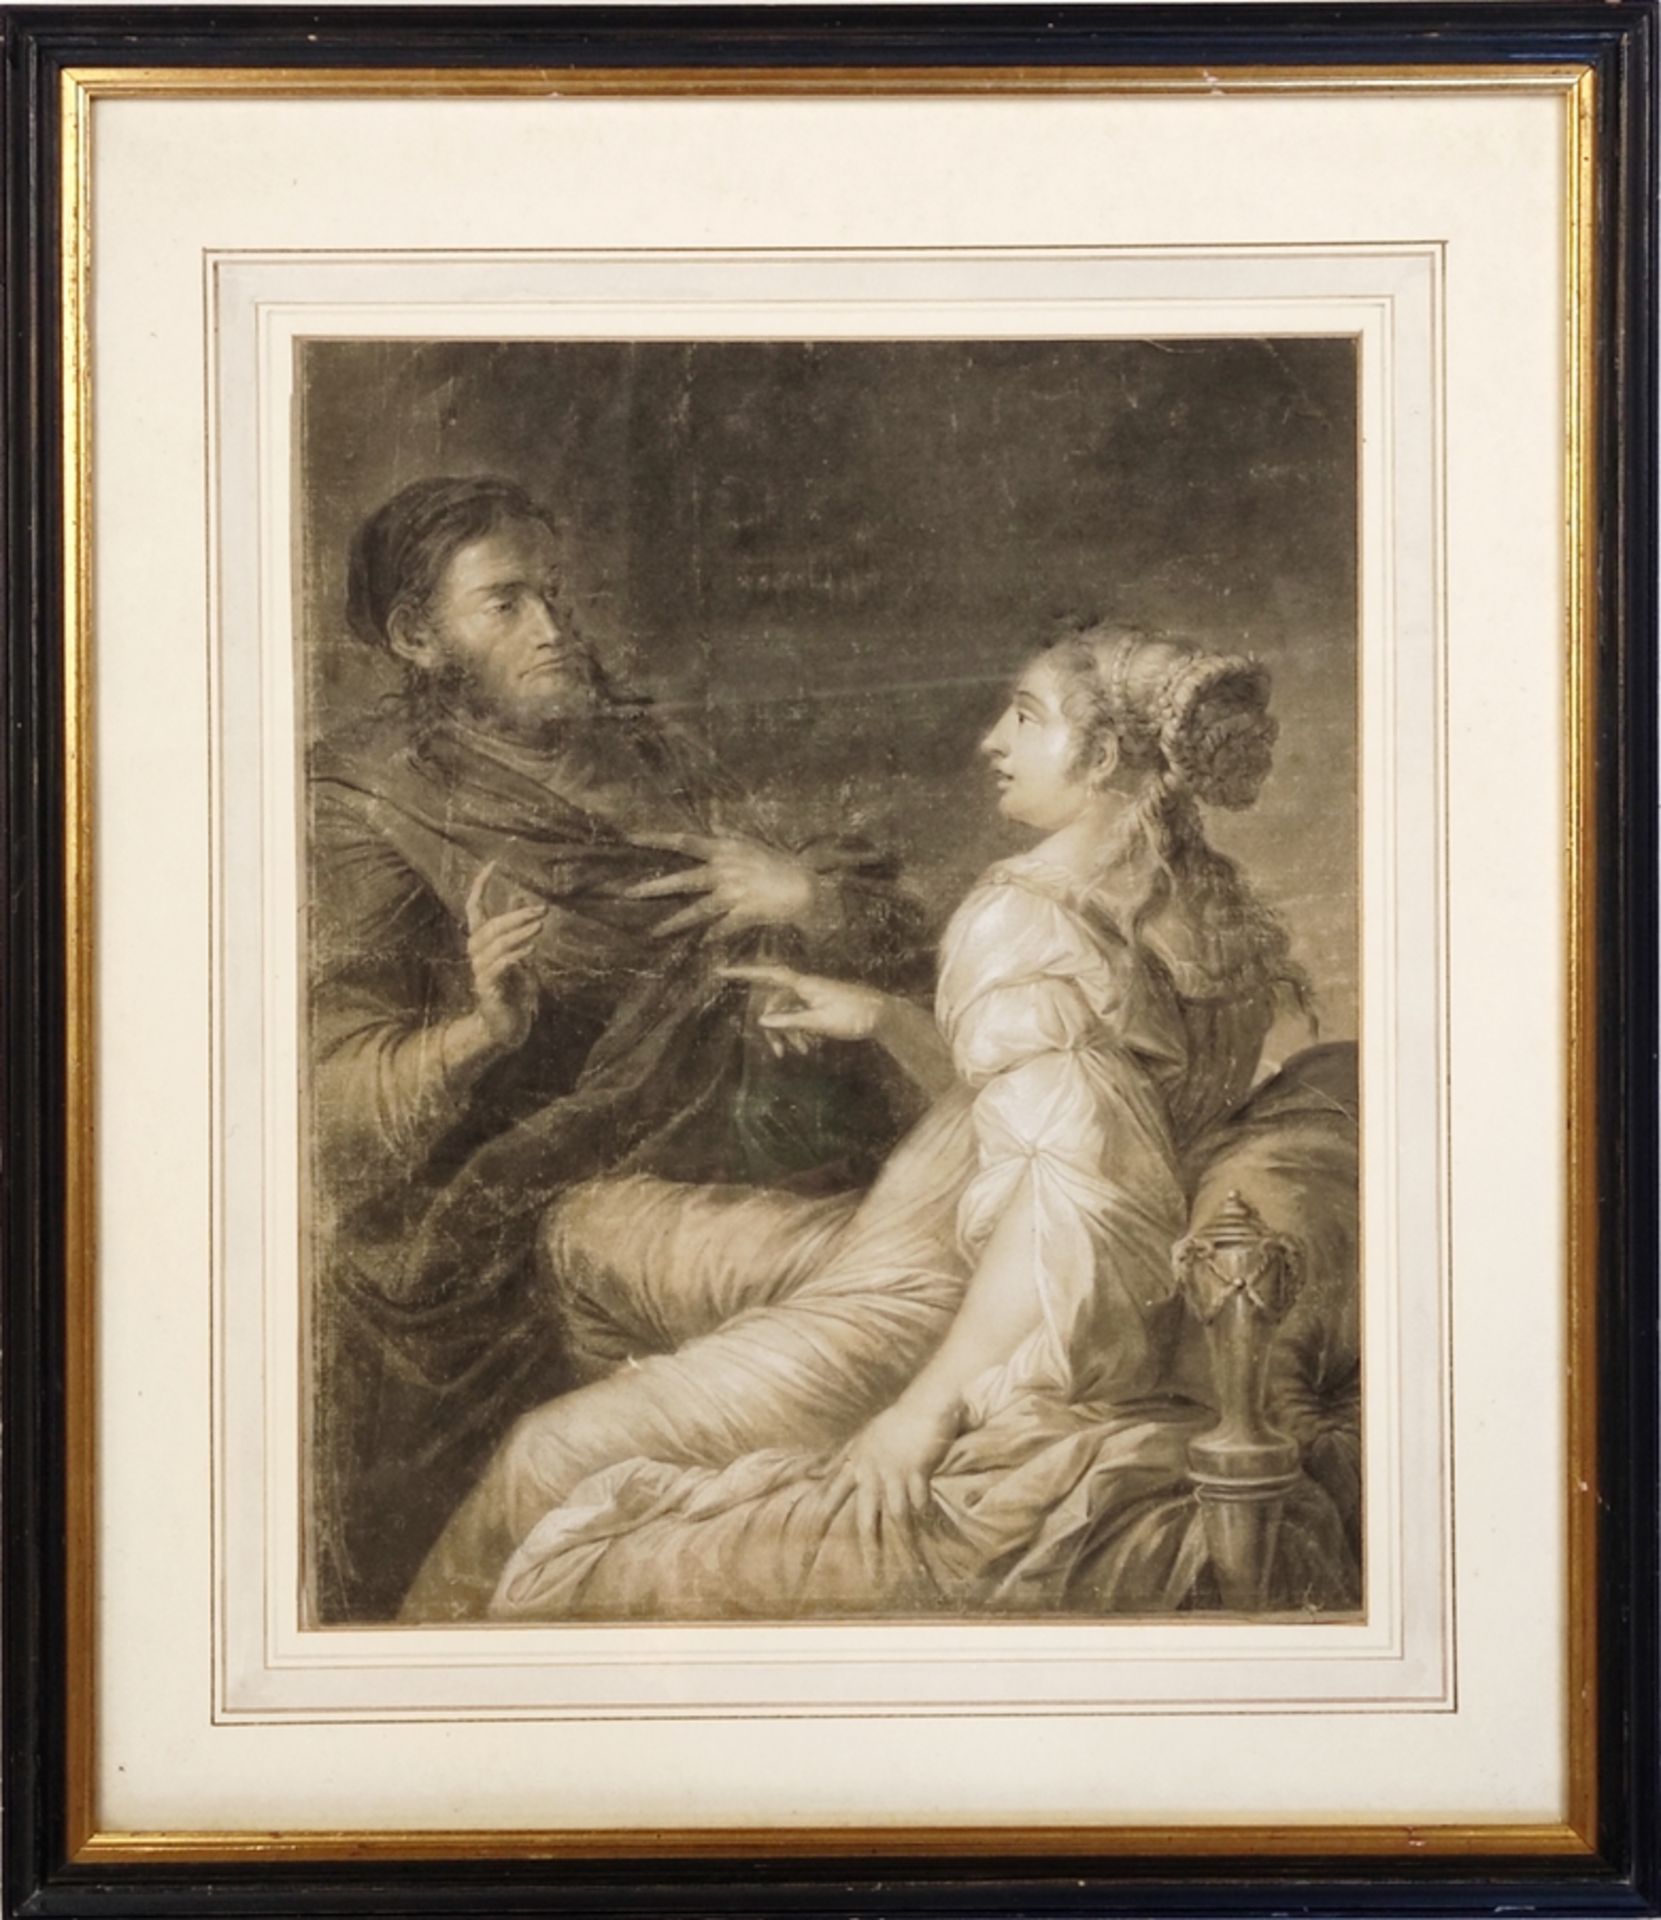 Baroque artist (17th/18th century) "Phryne seduces Xenocrates", after Salvator Rosa, pastel chalk a - Image 2 of 2